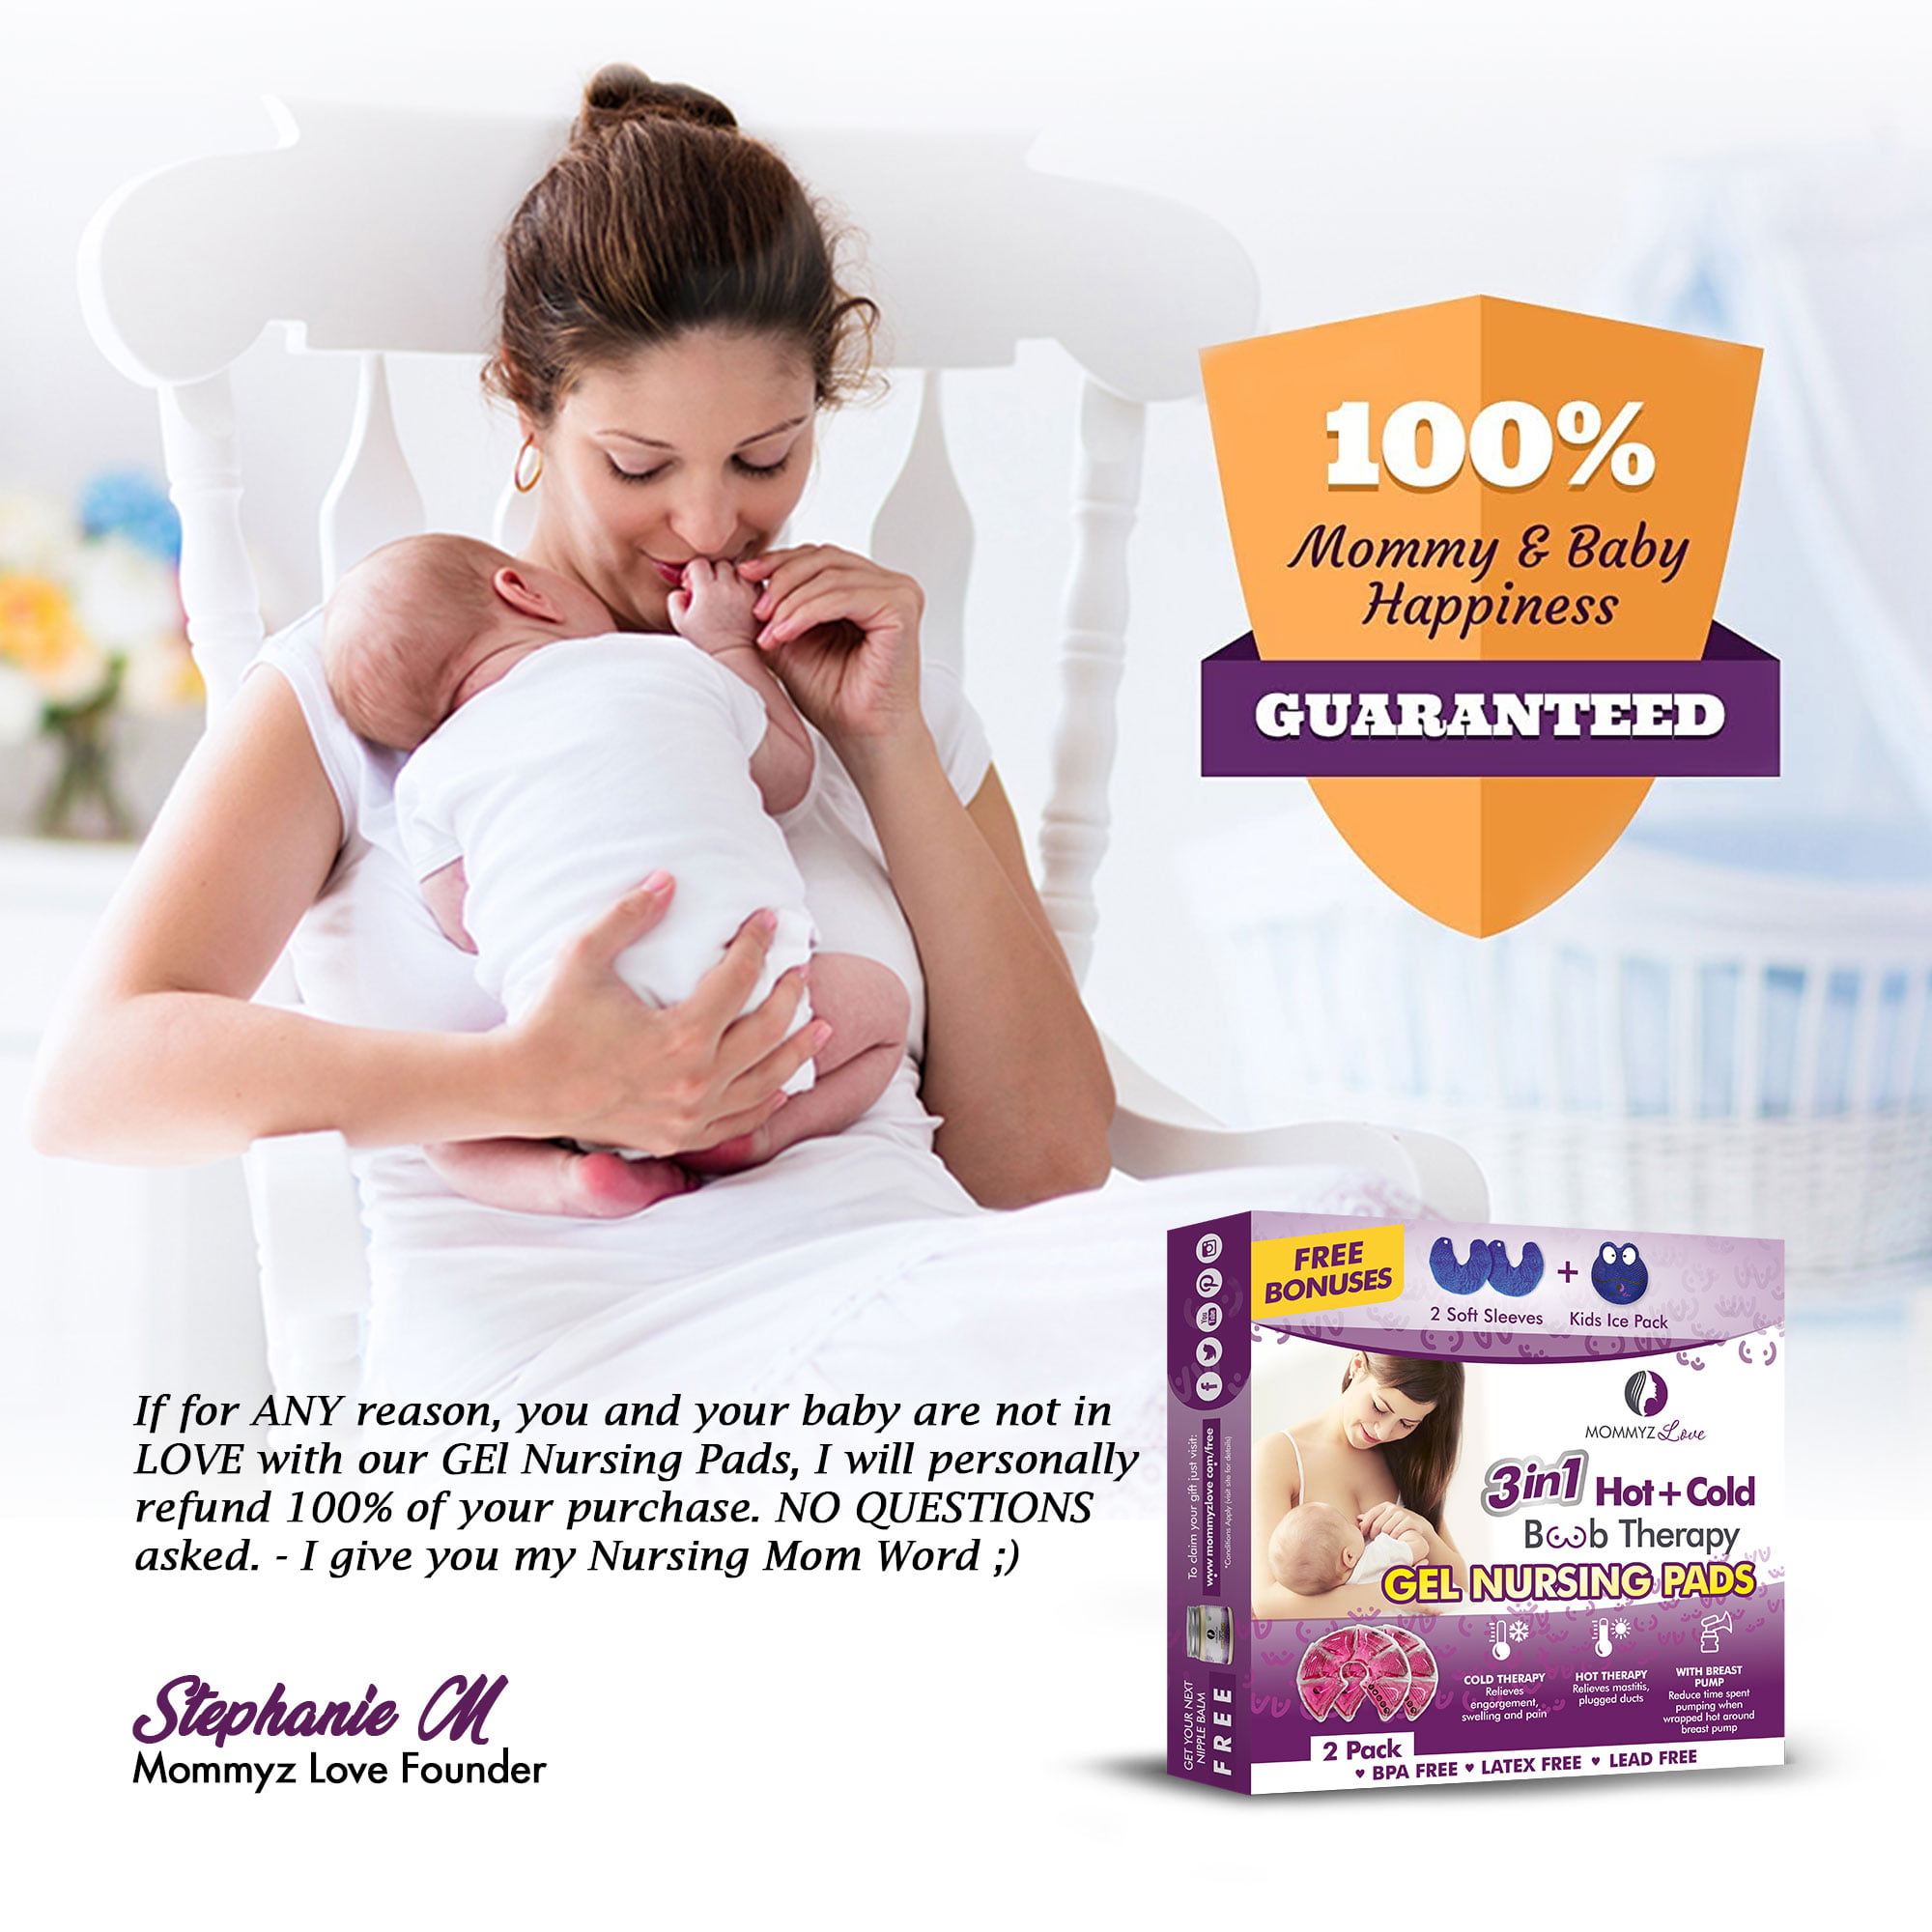 Magic Gel Luxury Breast Therapy Pack | The Breastfeeding Essentials for  Nursing Mothers | Includes 2X Breast Ice Packs (Hot or Cold) for  Breastfeeding